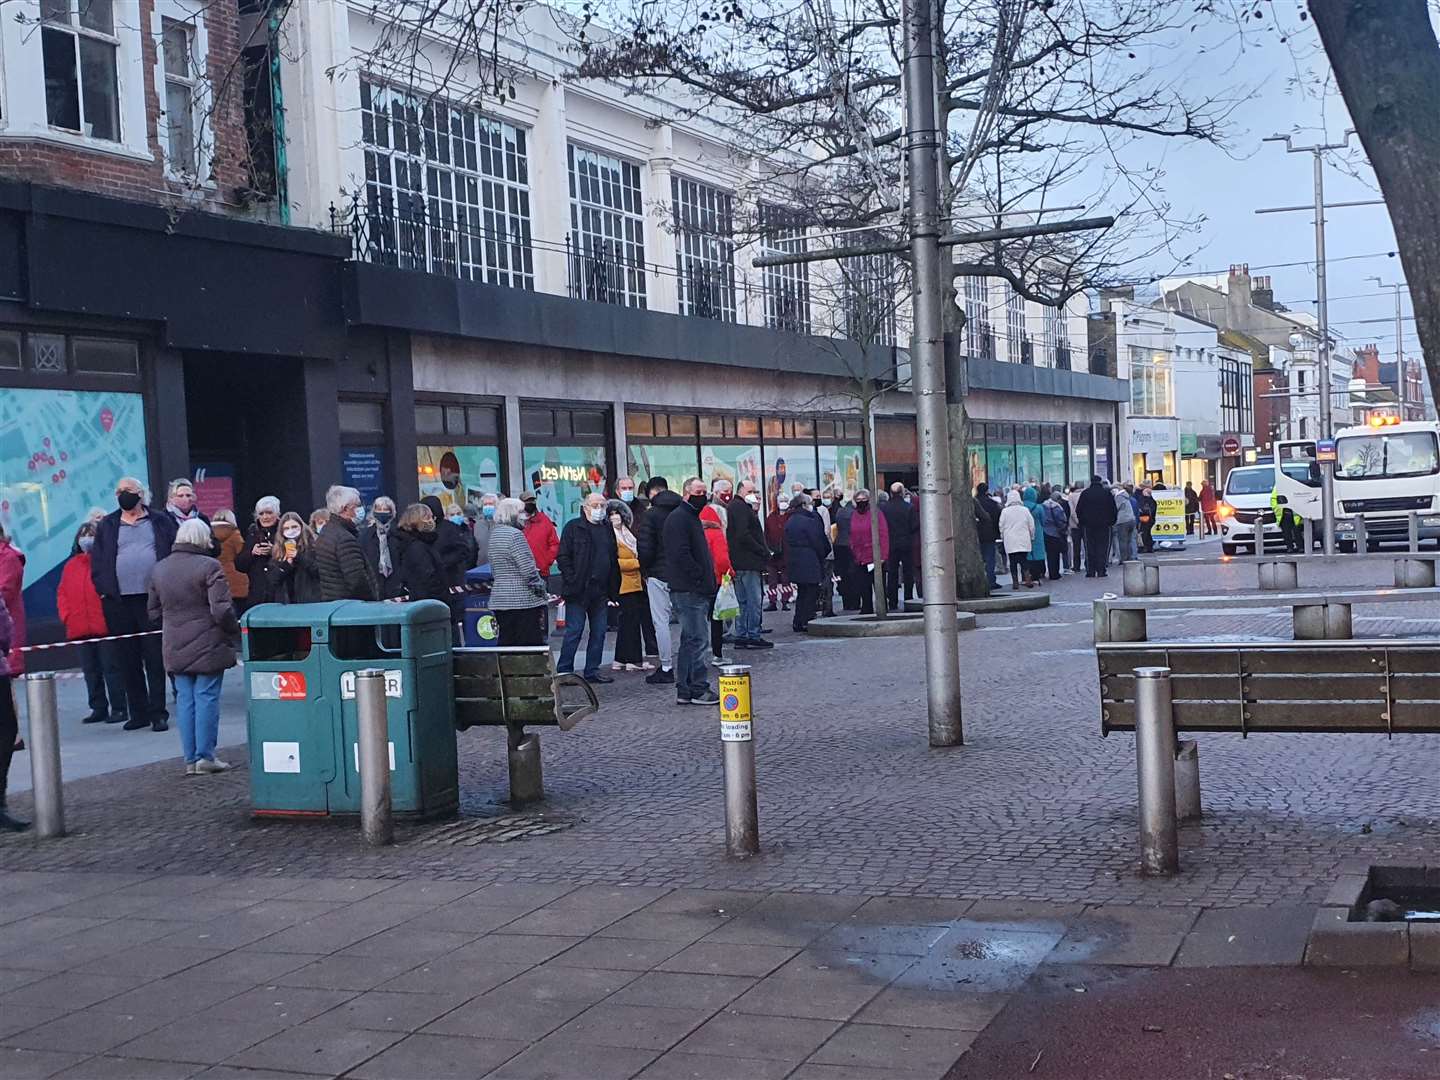 The long lines sparked fears over social distancing. Picture: Sean Axtell